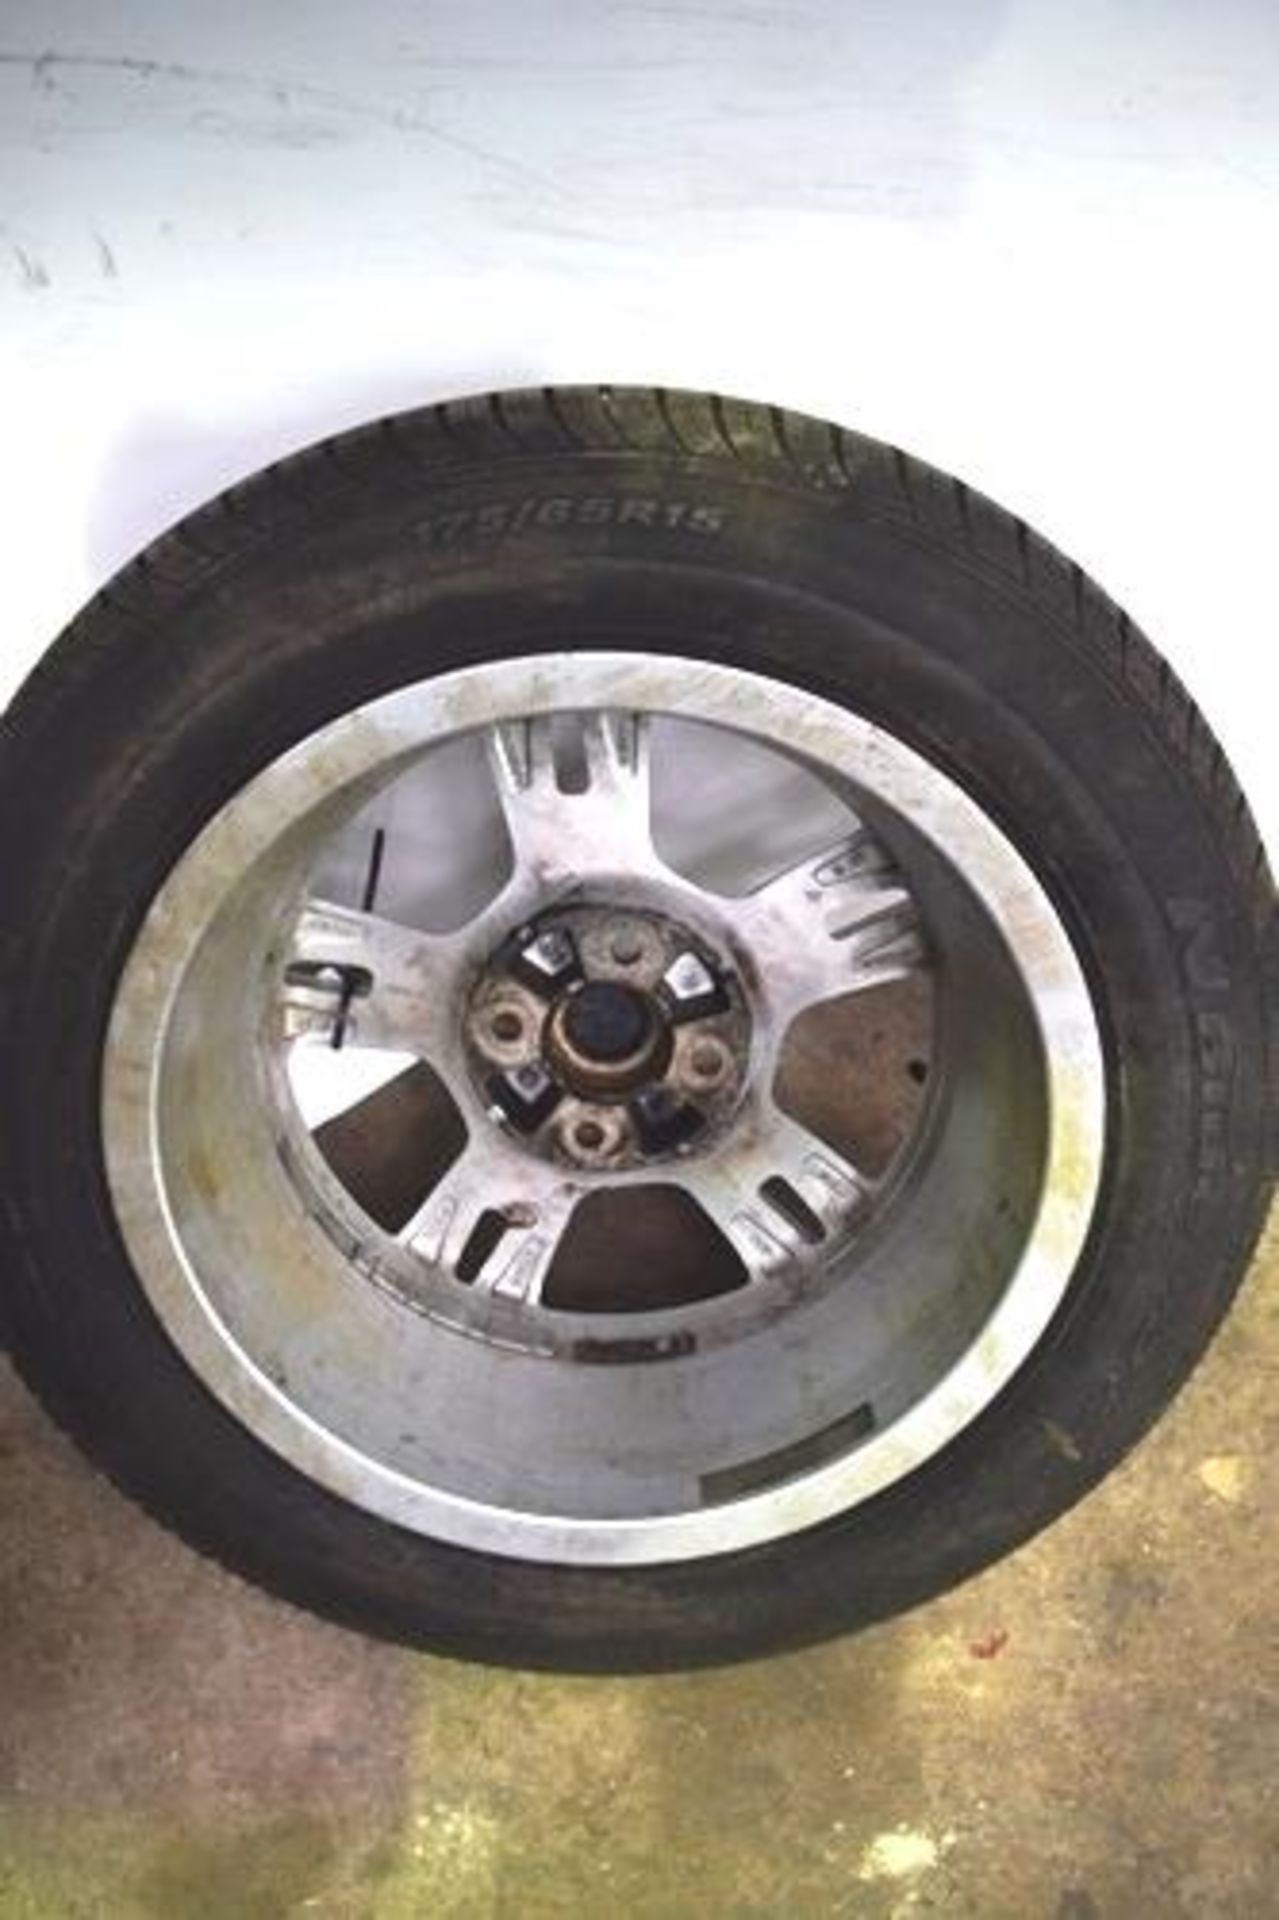 1 x Mazda 4 stud alloy wheel and 1 x Fiat 4 stud alloy wheel, both with fitted tyres - Second- - Image 3 of 6